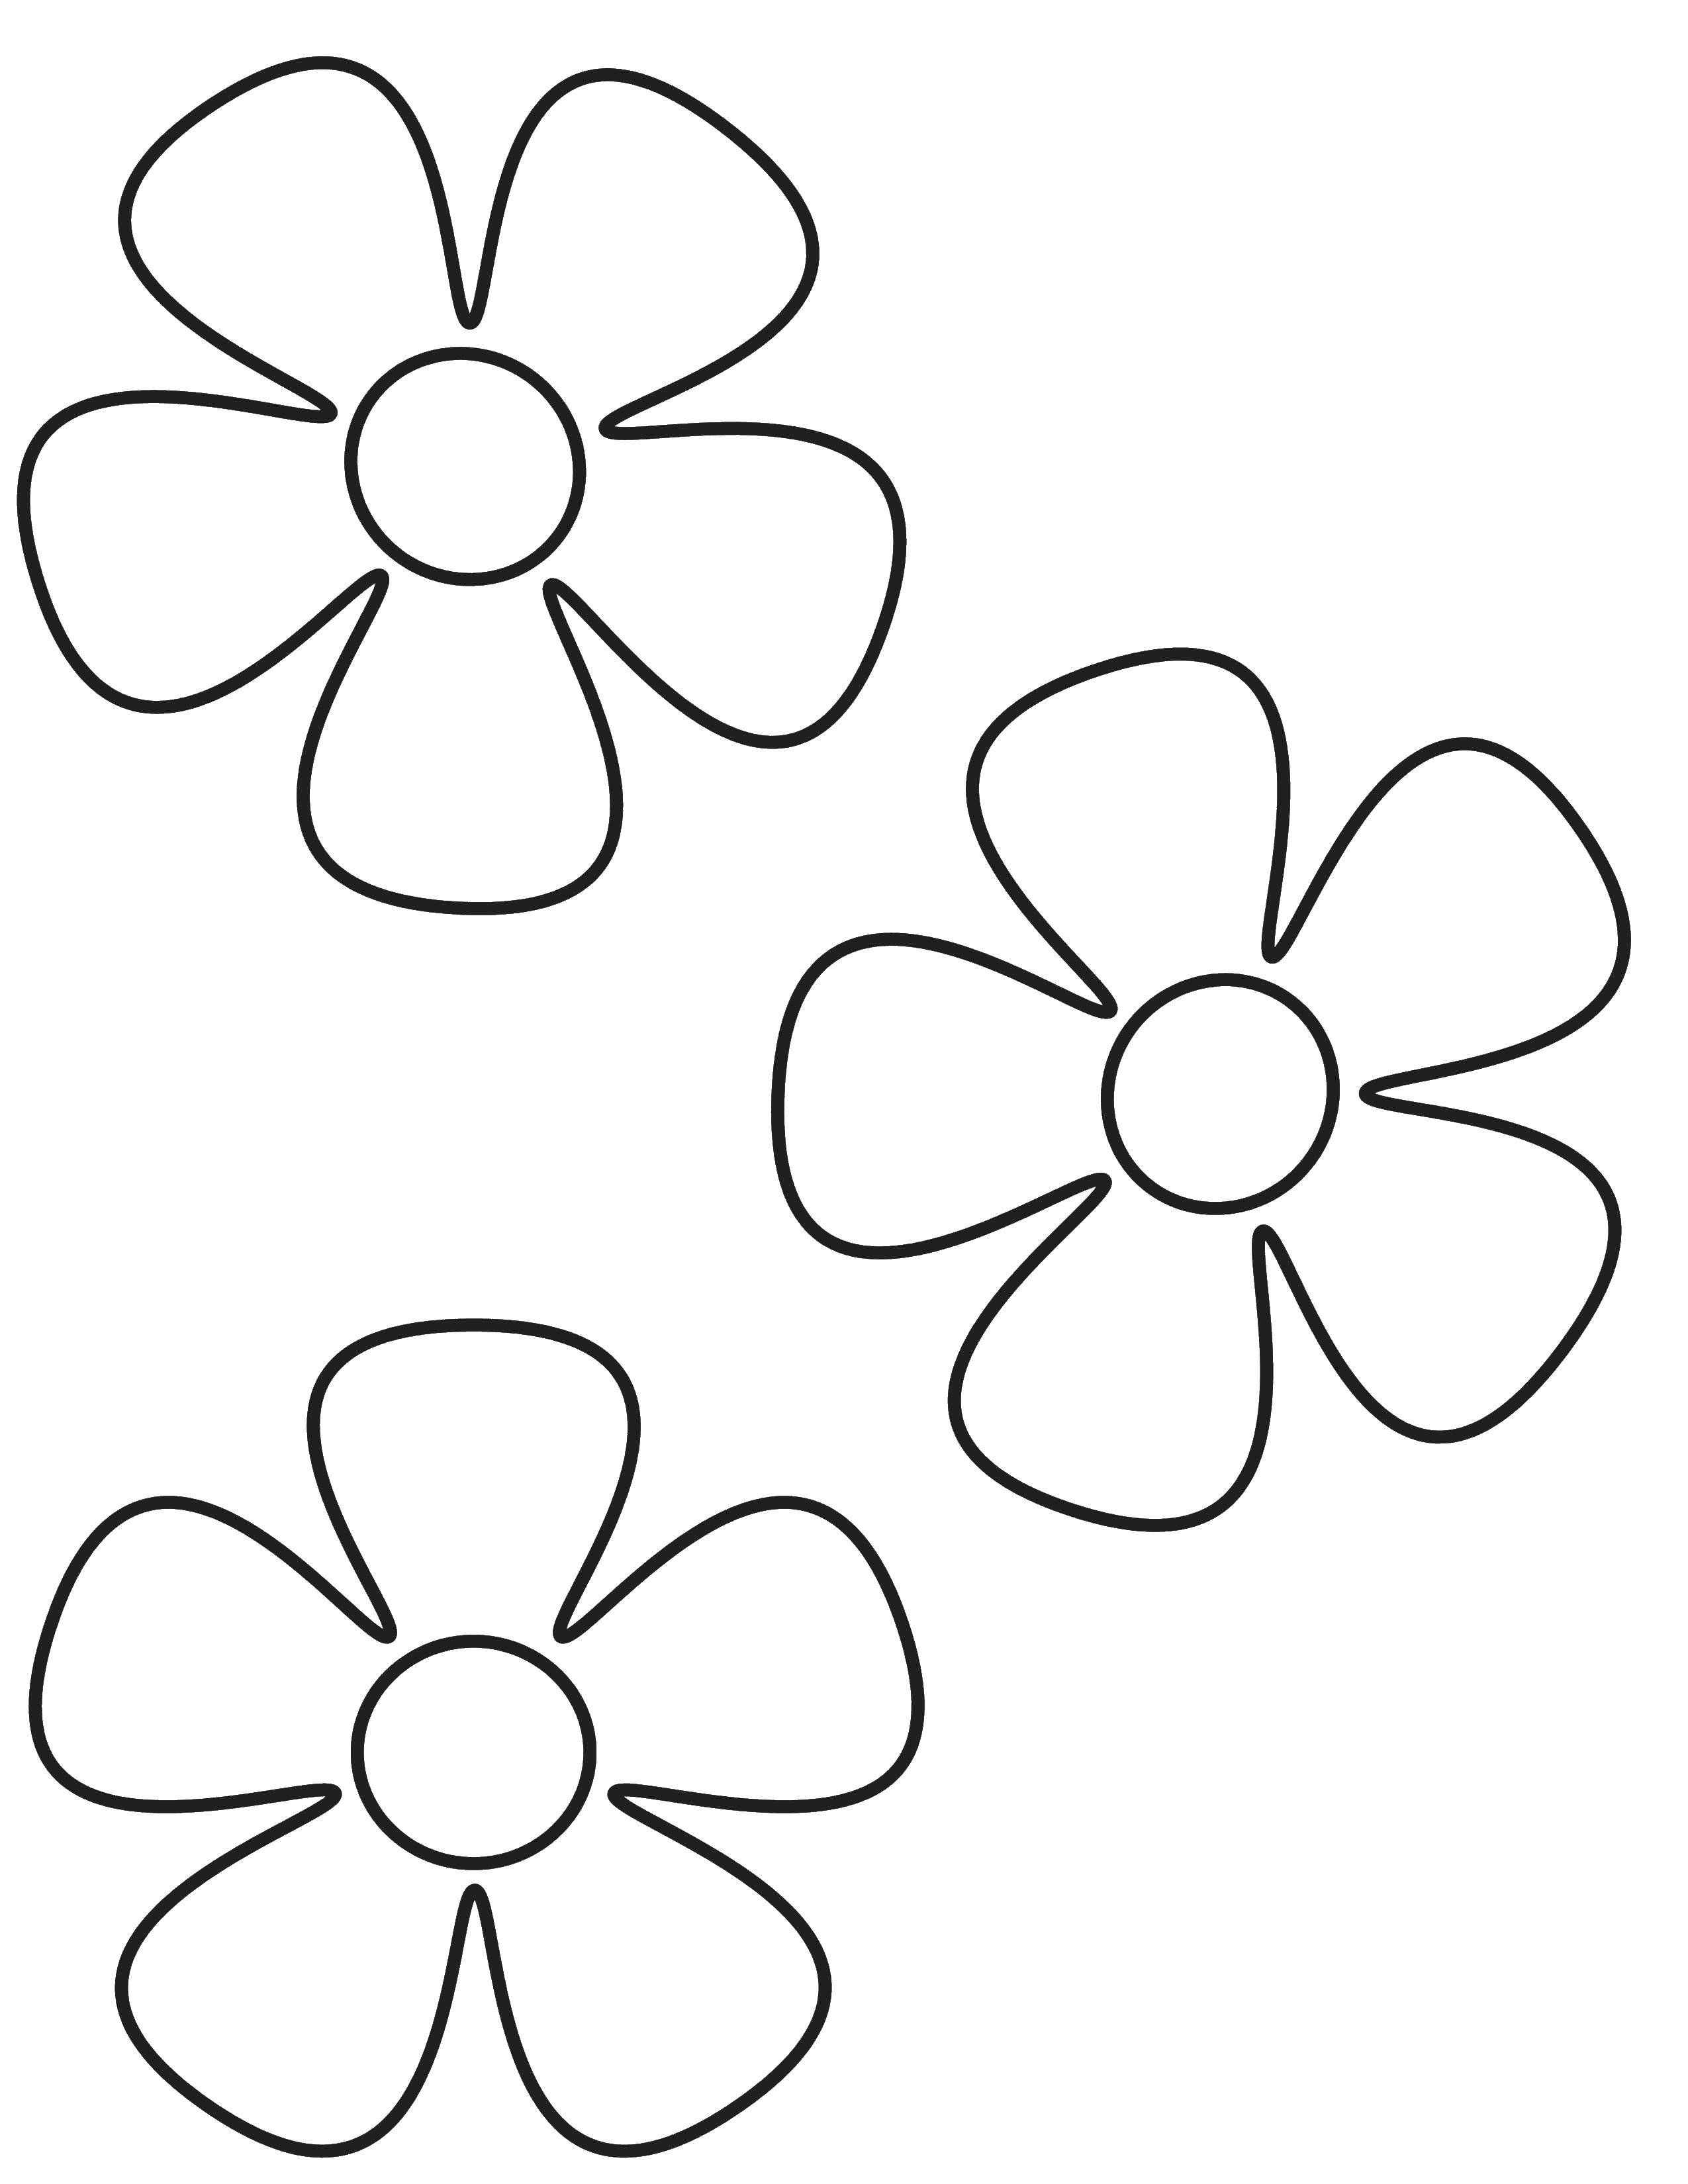 Coloring Three flower. Category Coloring pages for kids. Tags:  Flowers.